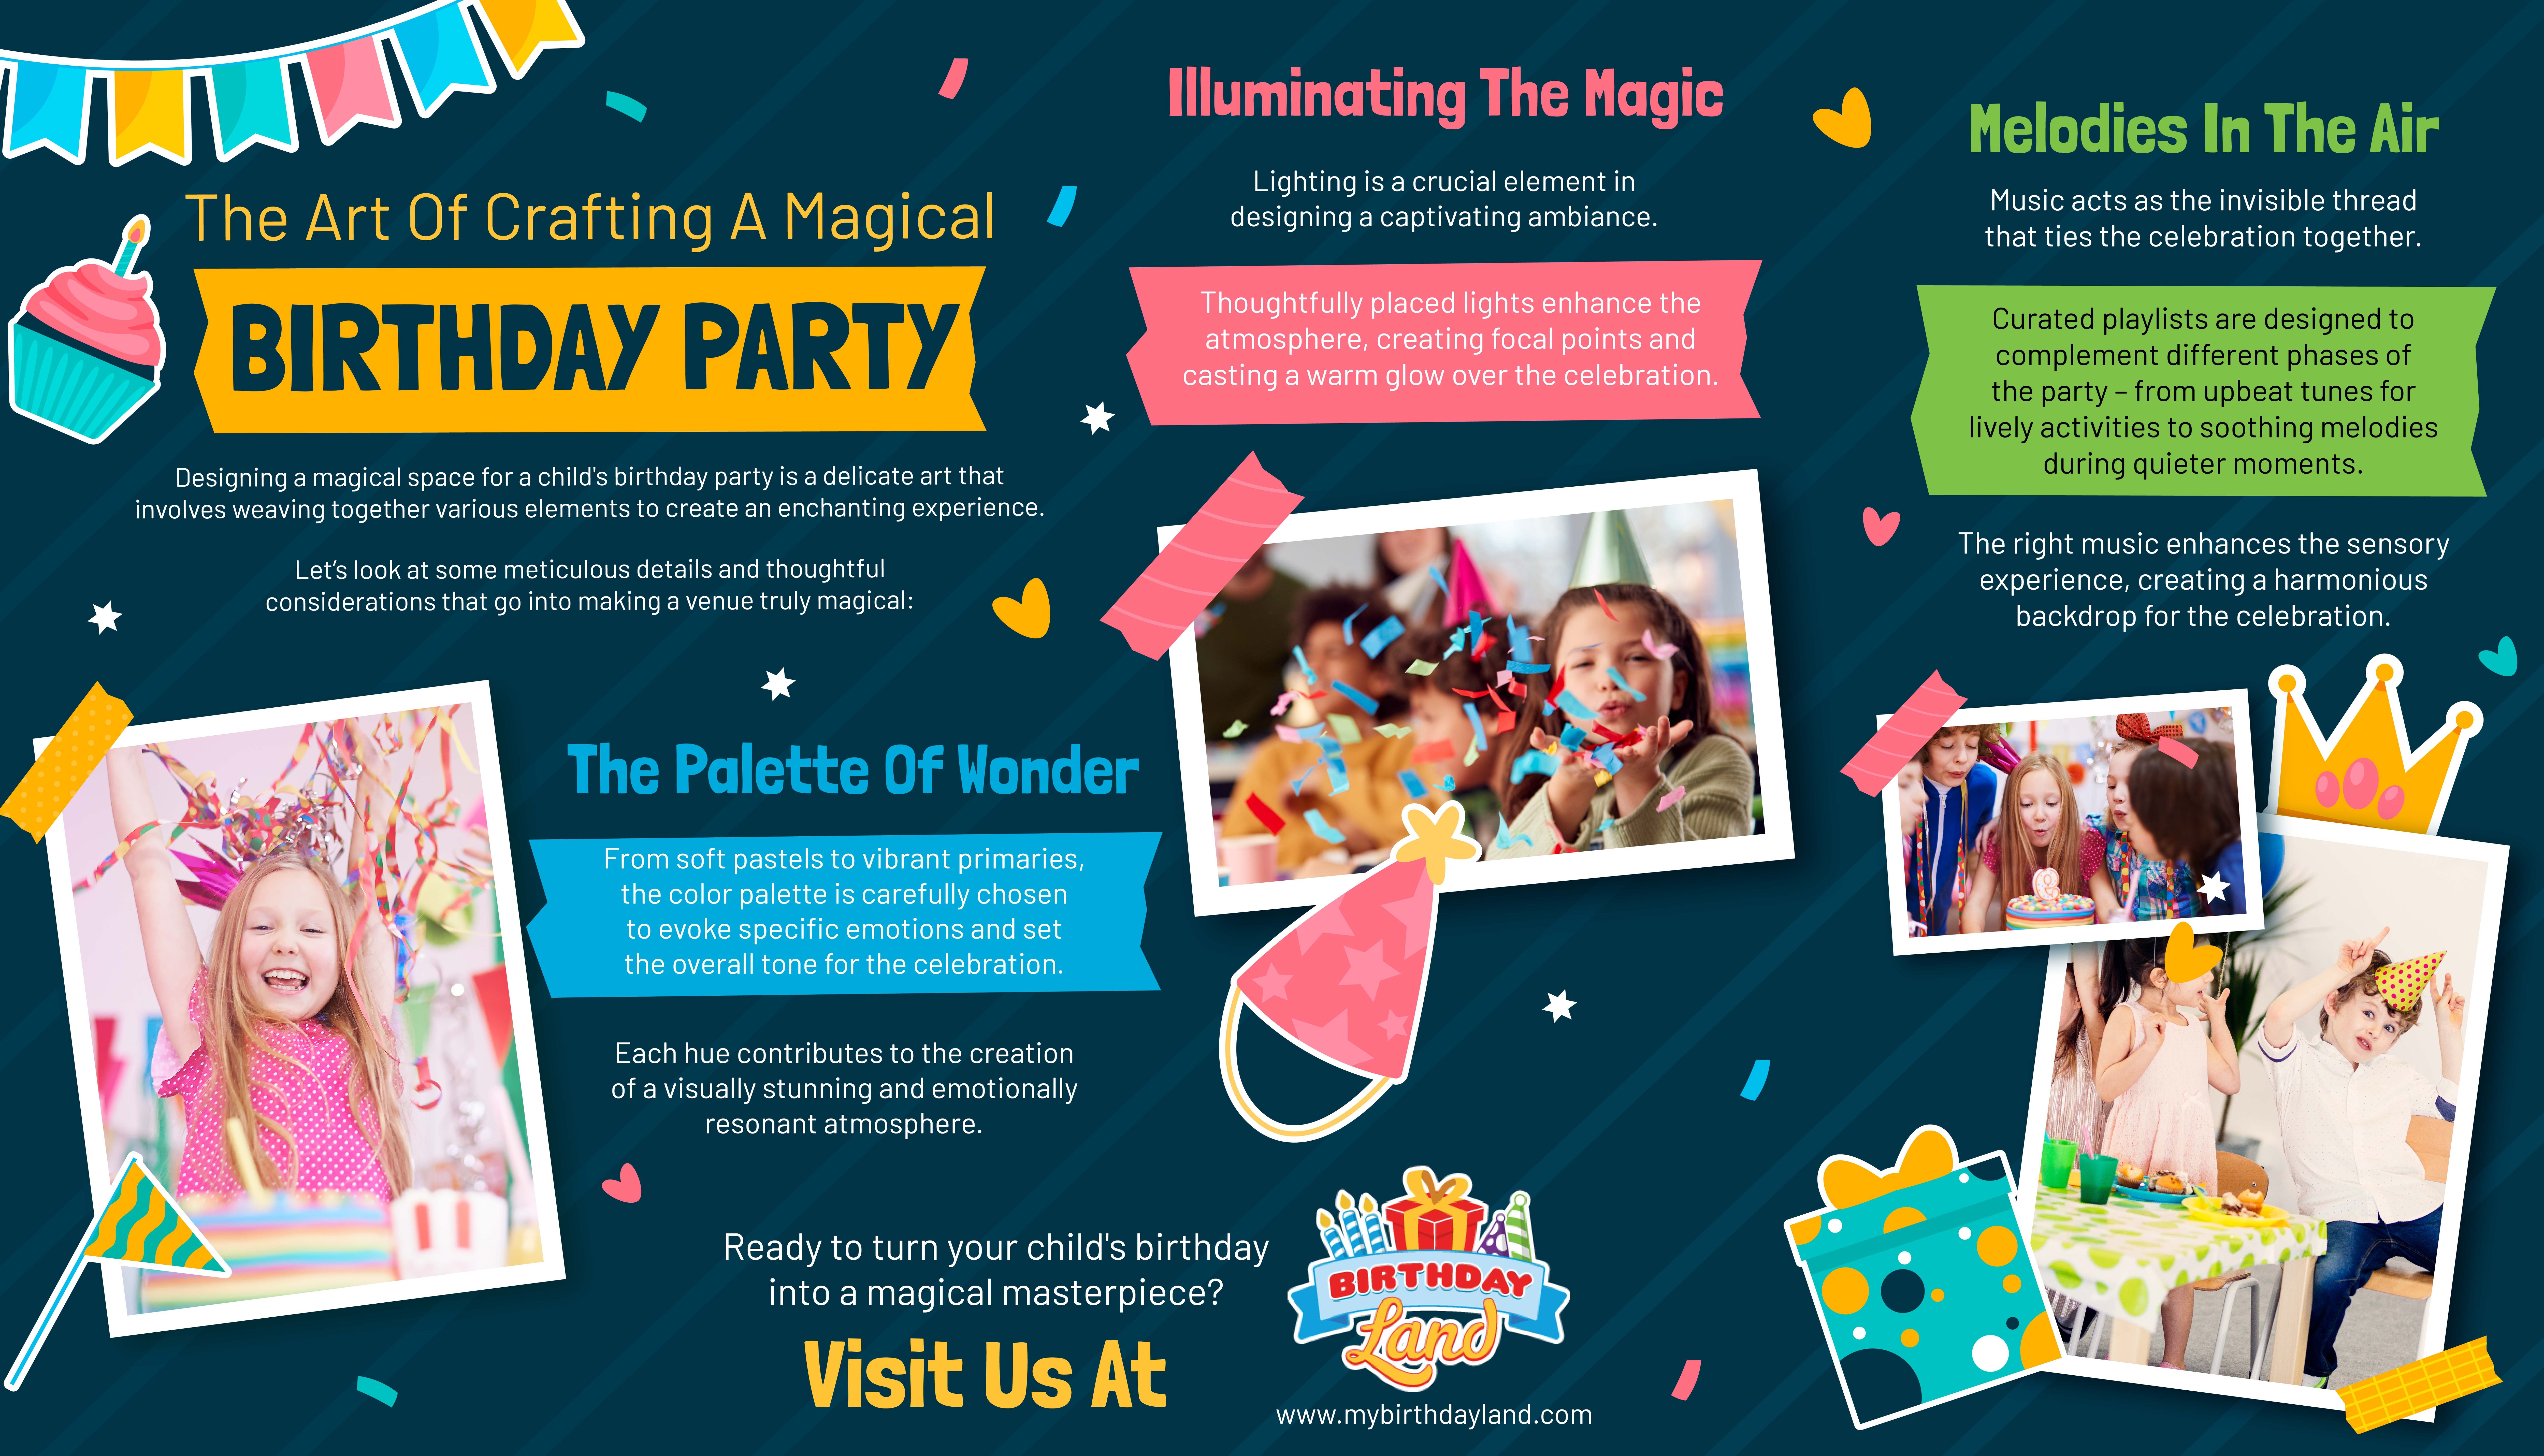 Explore the art of crafting a magical birthday party venue